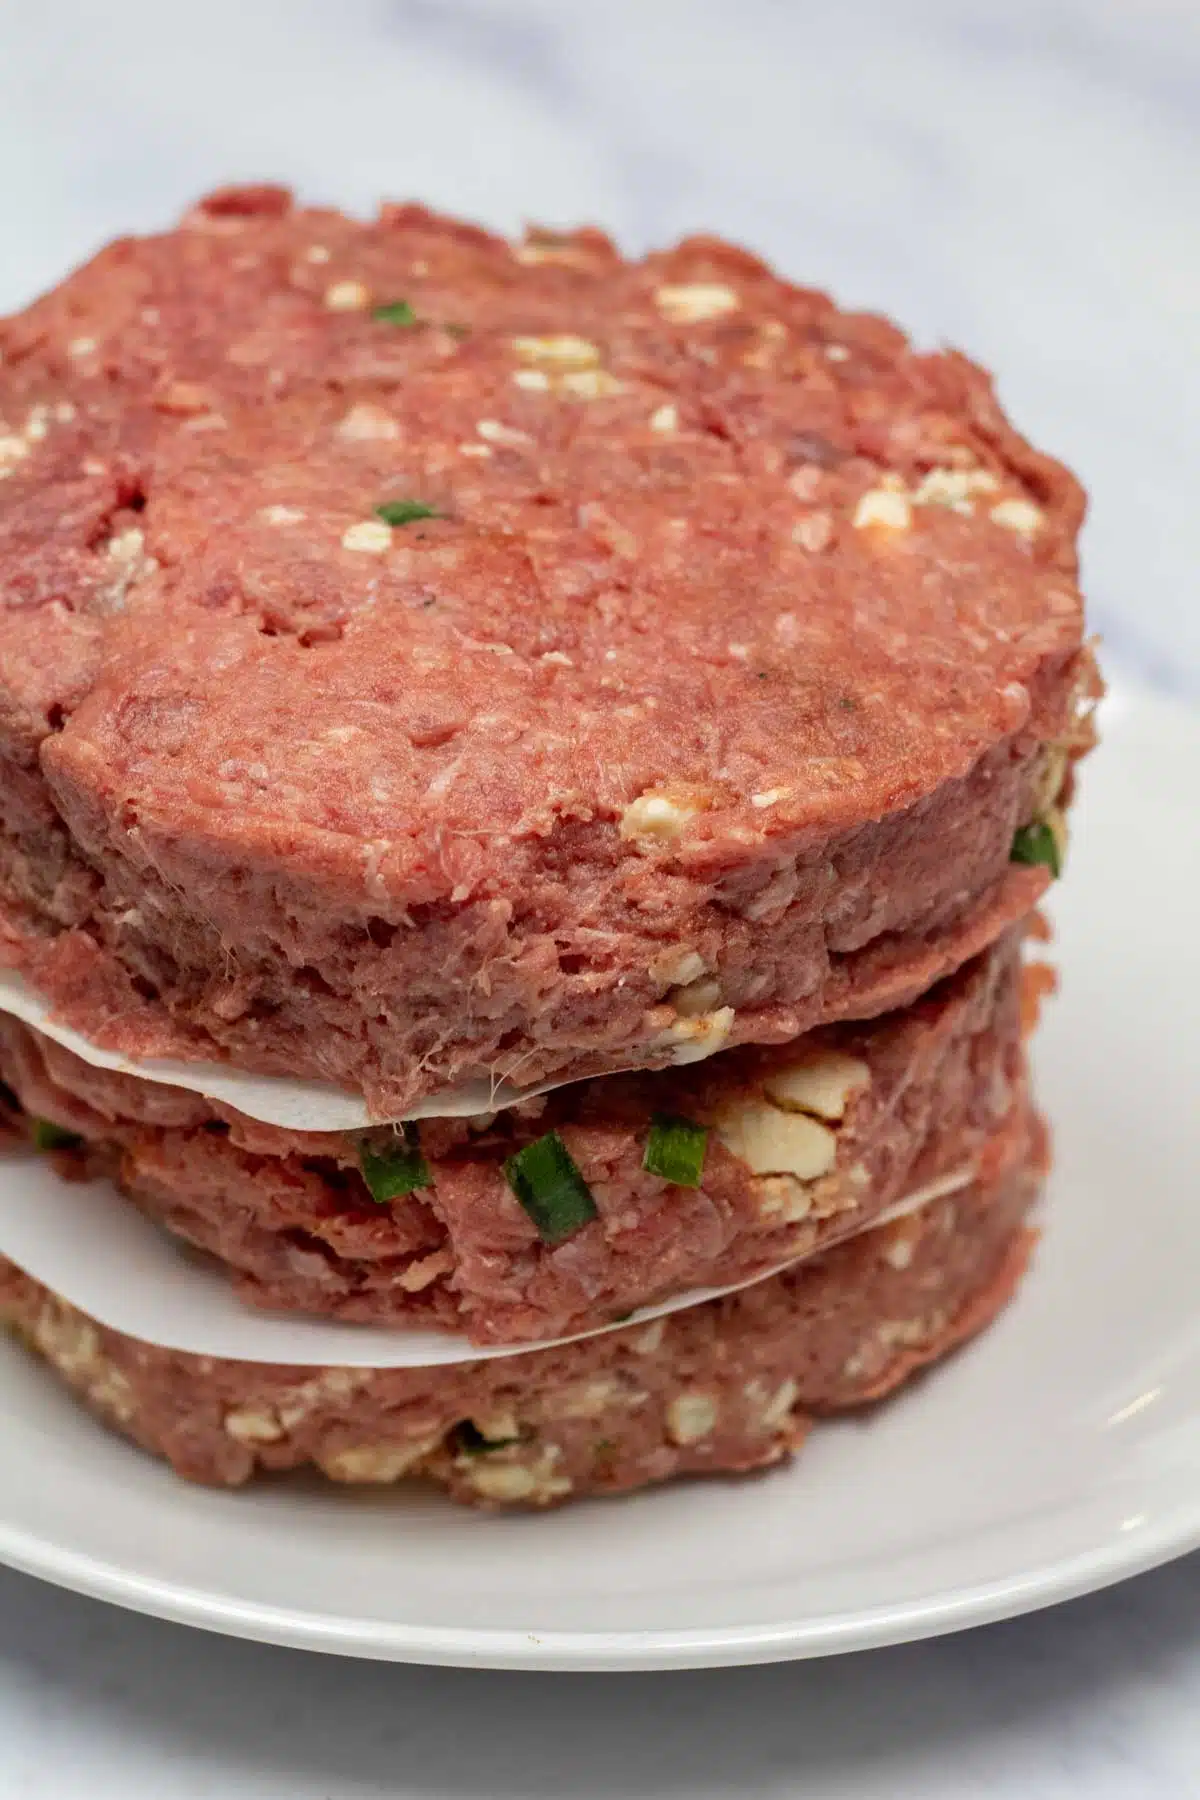 Tall ingredient image showing the formed burger patties before cooking.